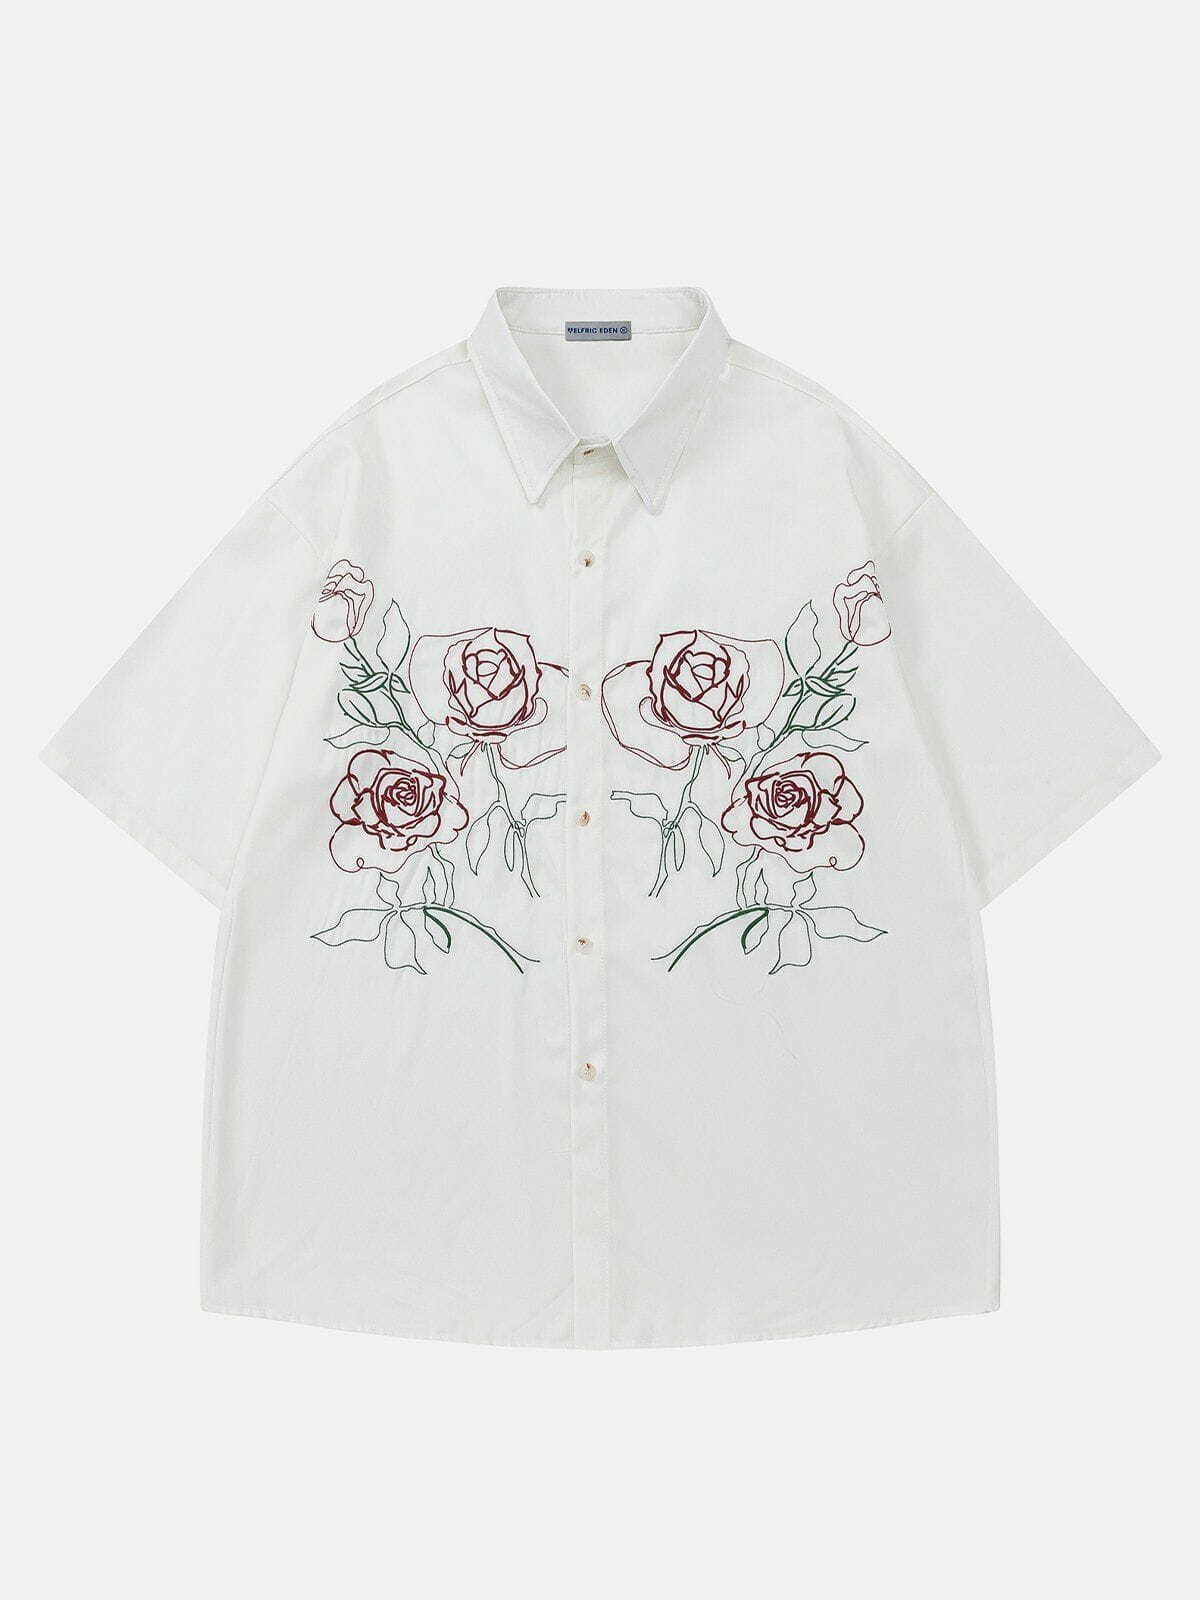 chic flower embroidered shirt   youthful & trendy appeal 8269